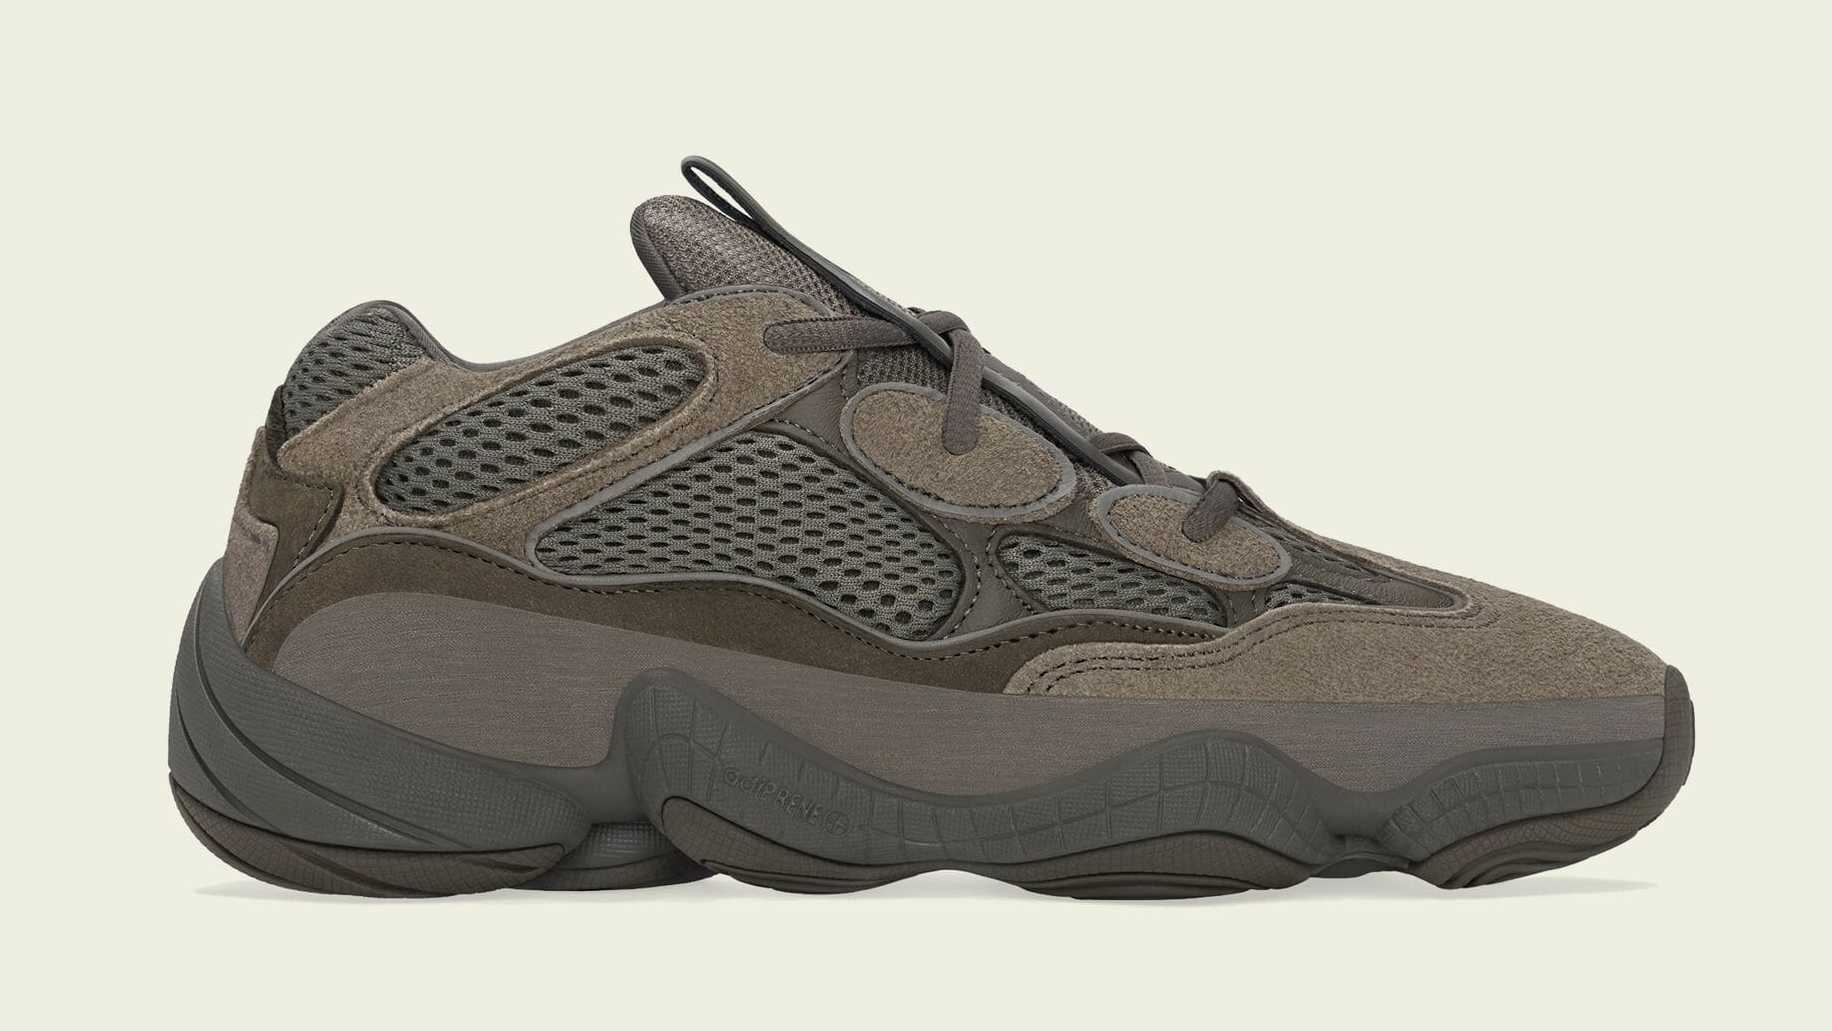 Adidas Yeezy 500 'Brown Clay' GX3606 (Lateral)